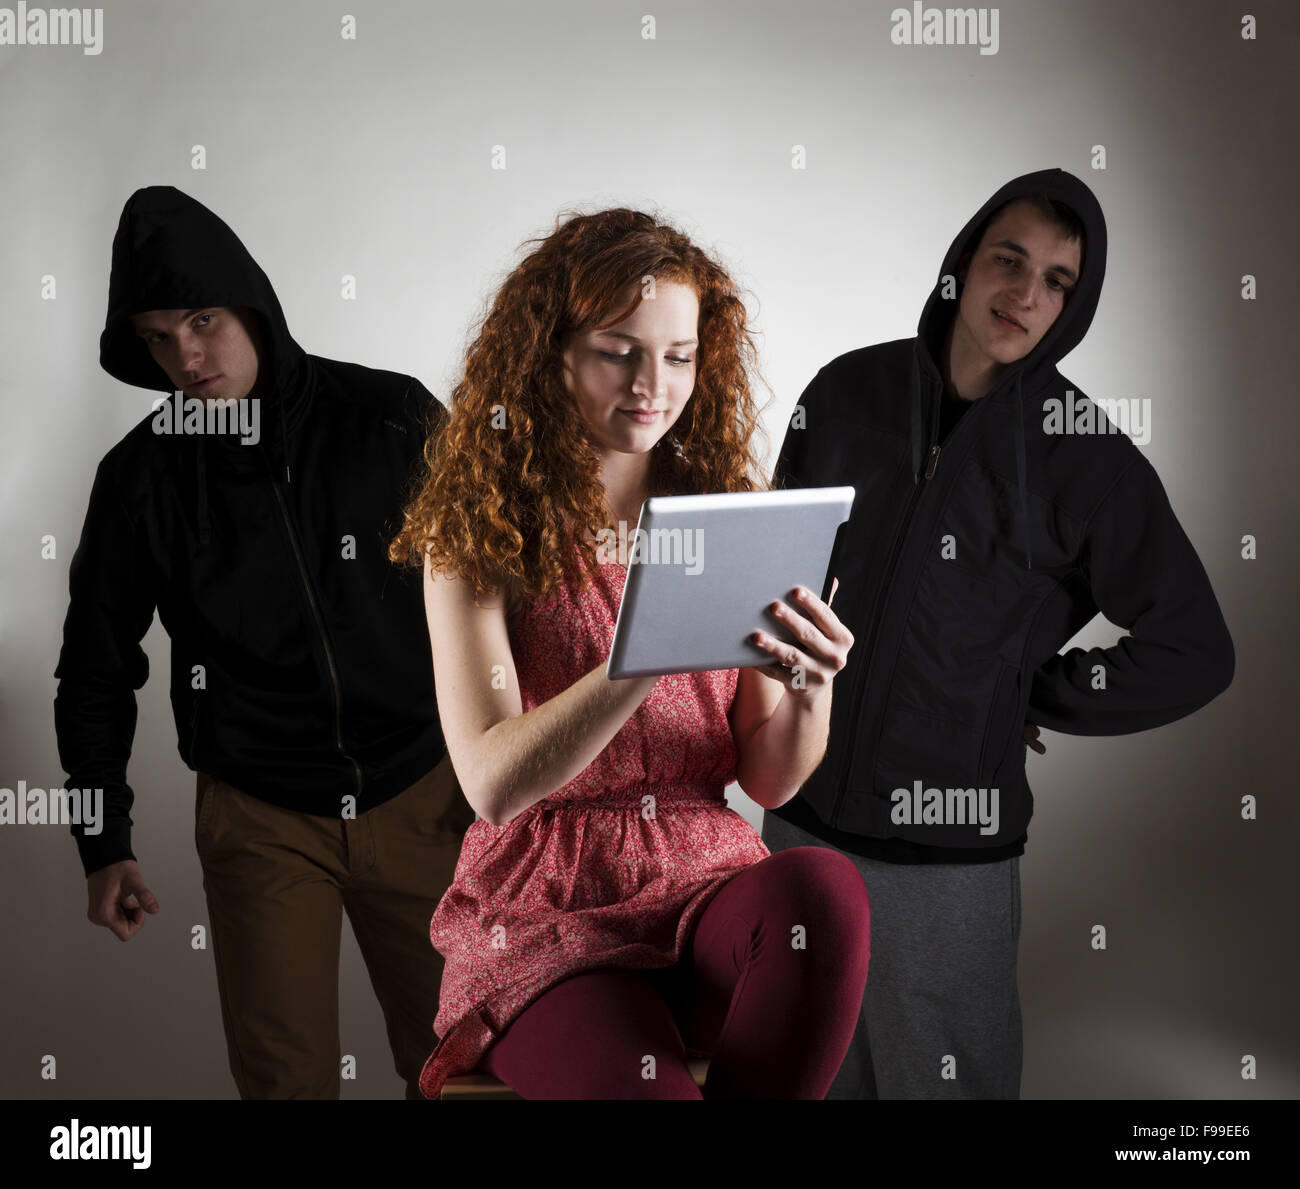 Concept of potential internet danger with teen girl and man in disguise Stock Photo